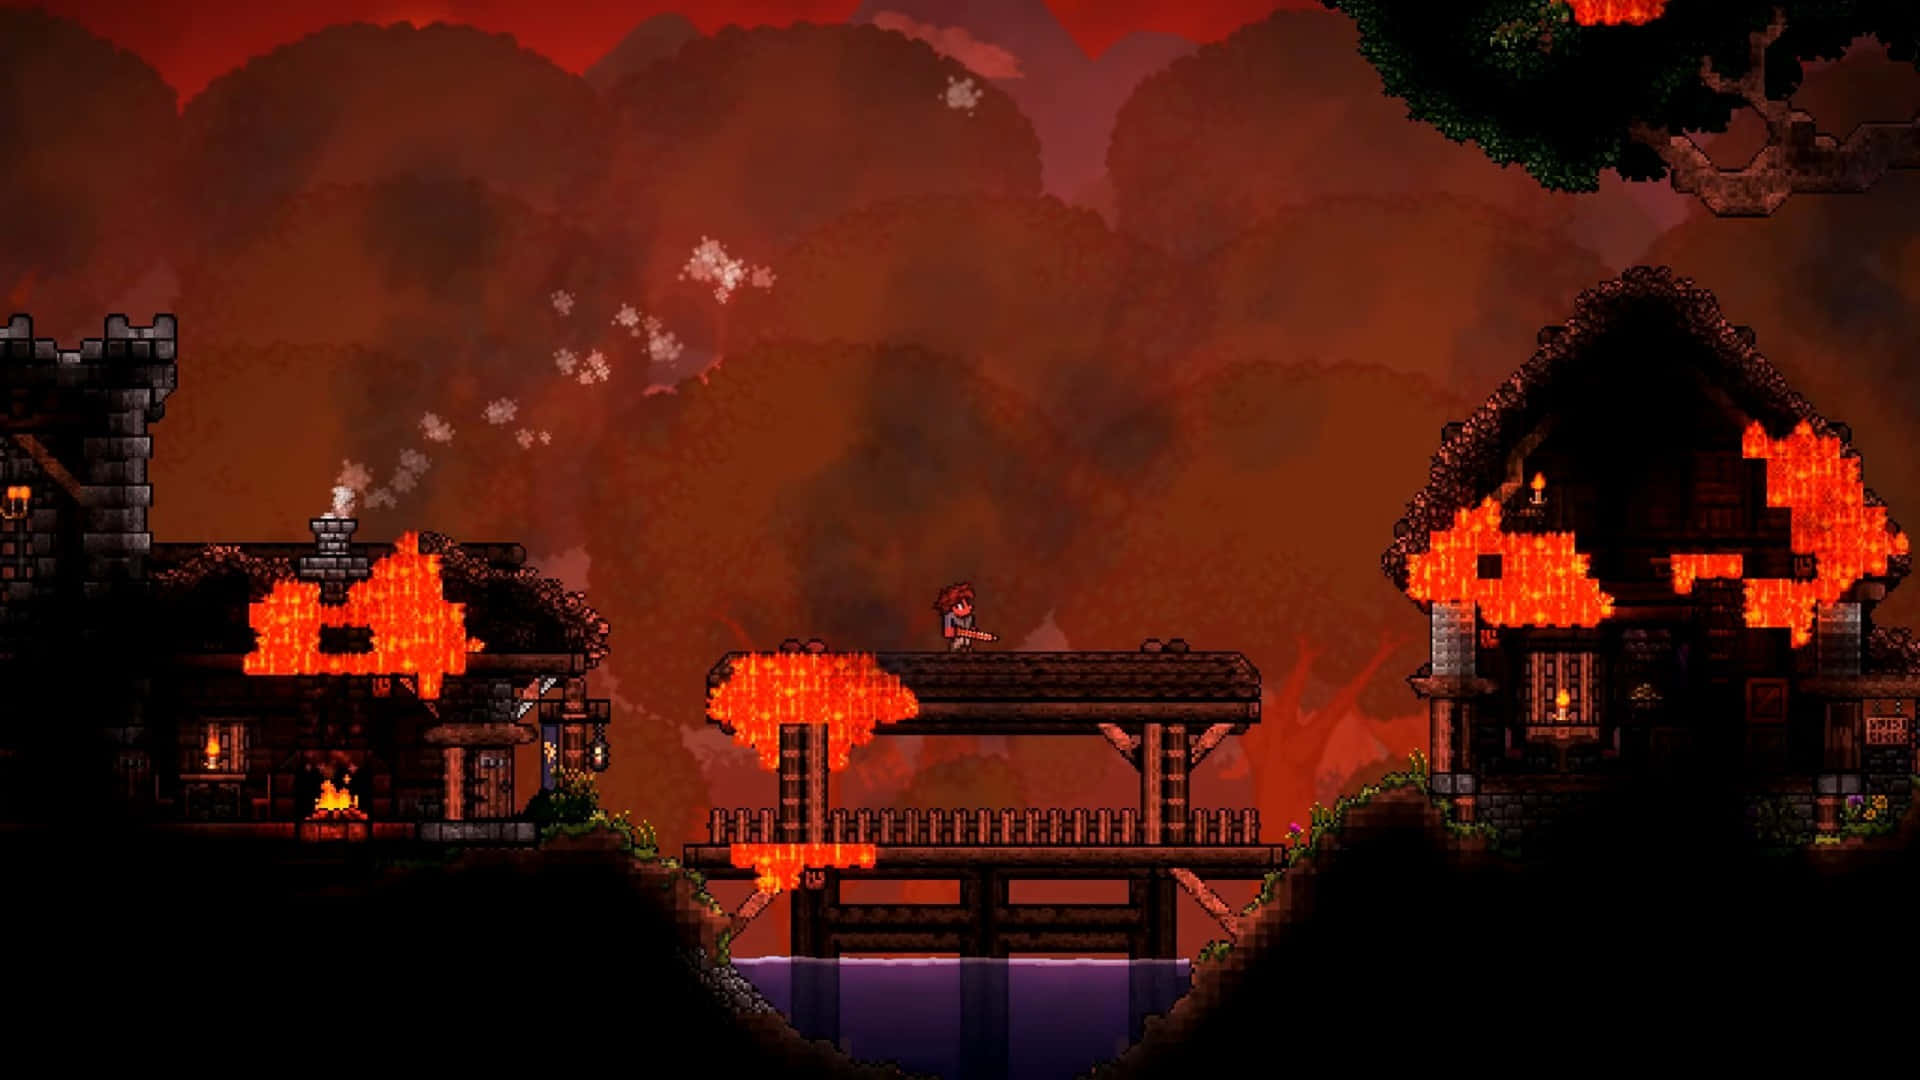 Explore the mysterious world of Terraria!